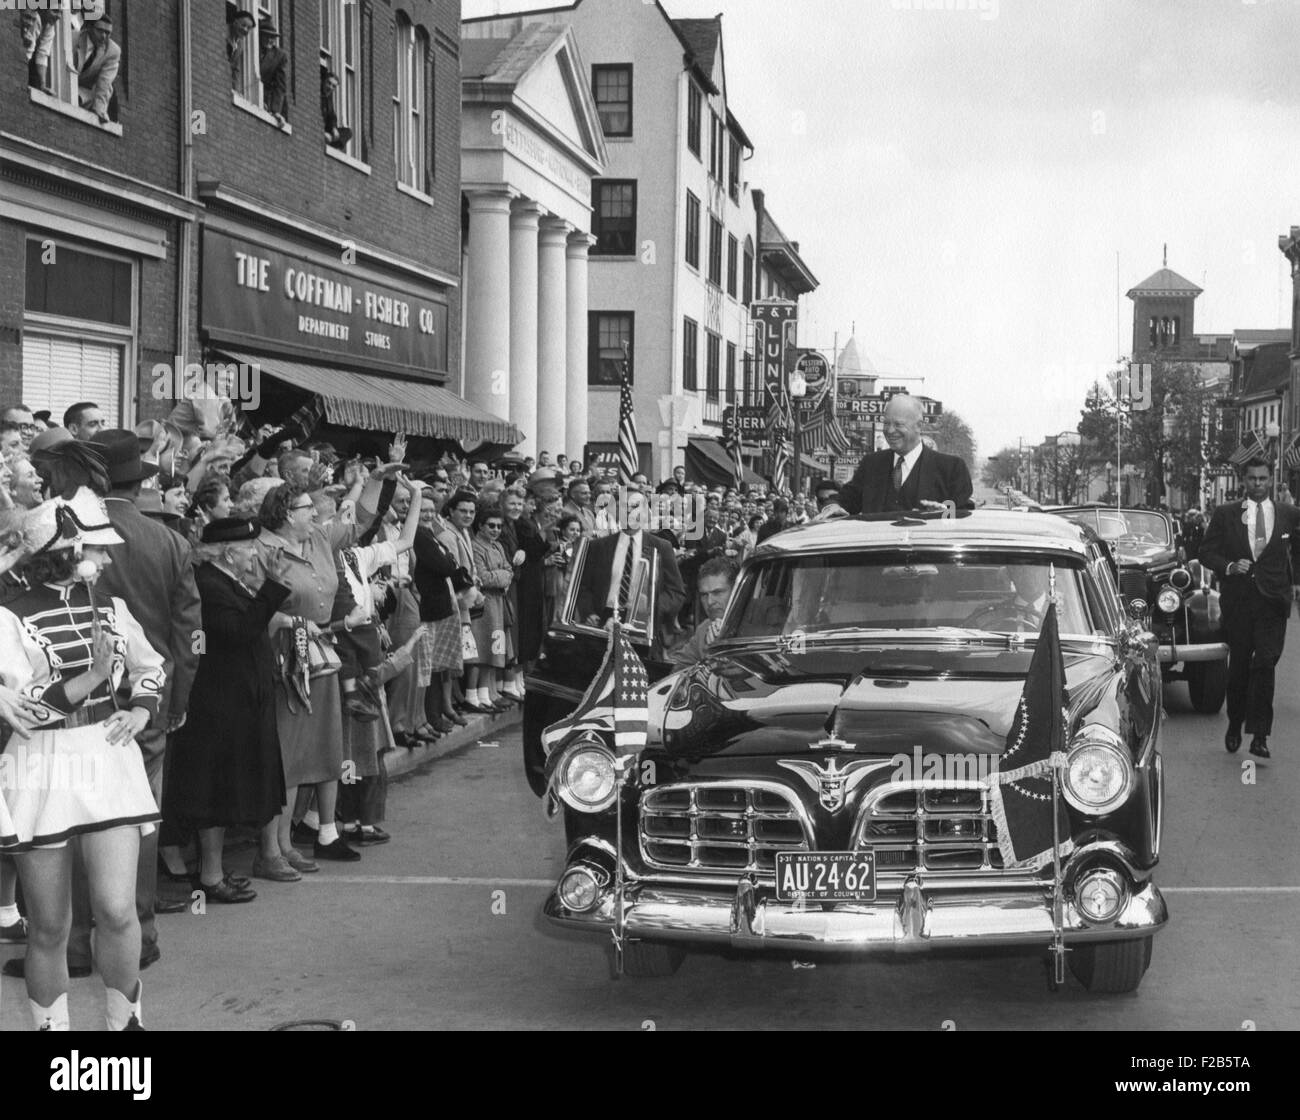 President Eisenhower is welcomed by crowd in Gettysburg on Nov. 14, 1955. He had been hospitalized at Fitzsimons Army Hospital in Denver for seven weeks after his Sept. 24, 1955 heart attack. - (BSLOC 2014 16 59) Stock Photo